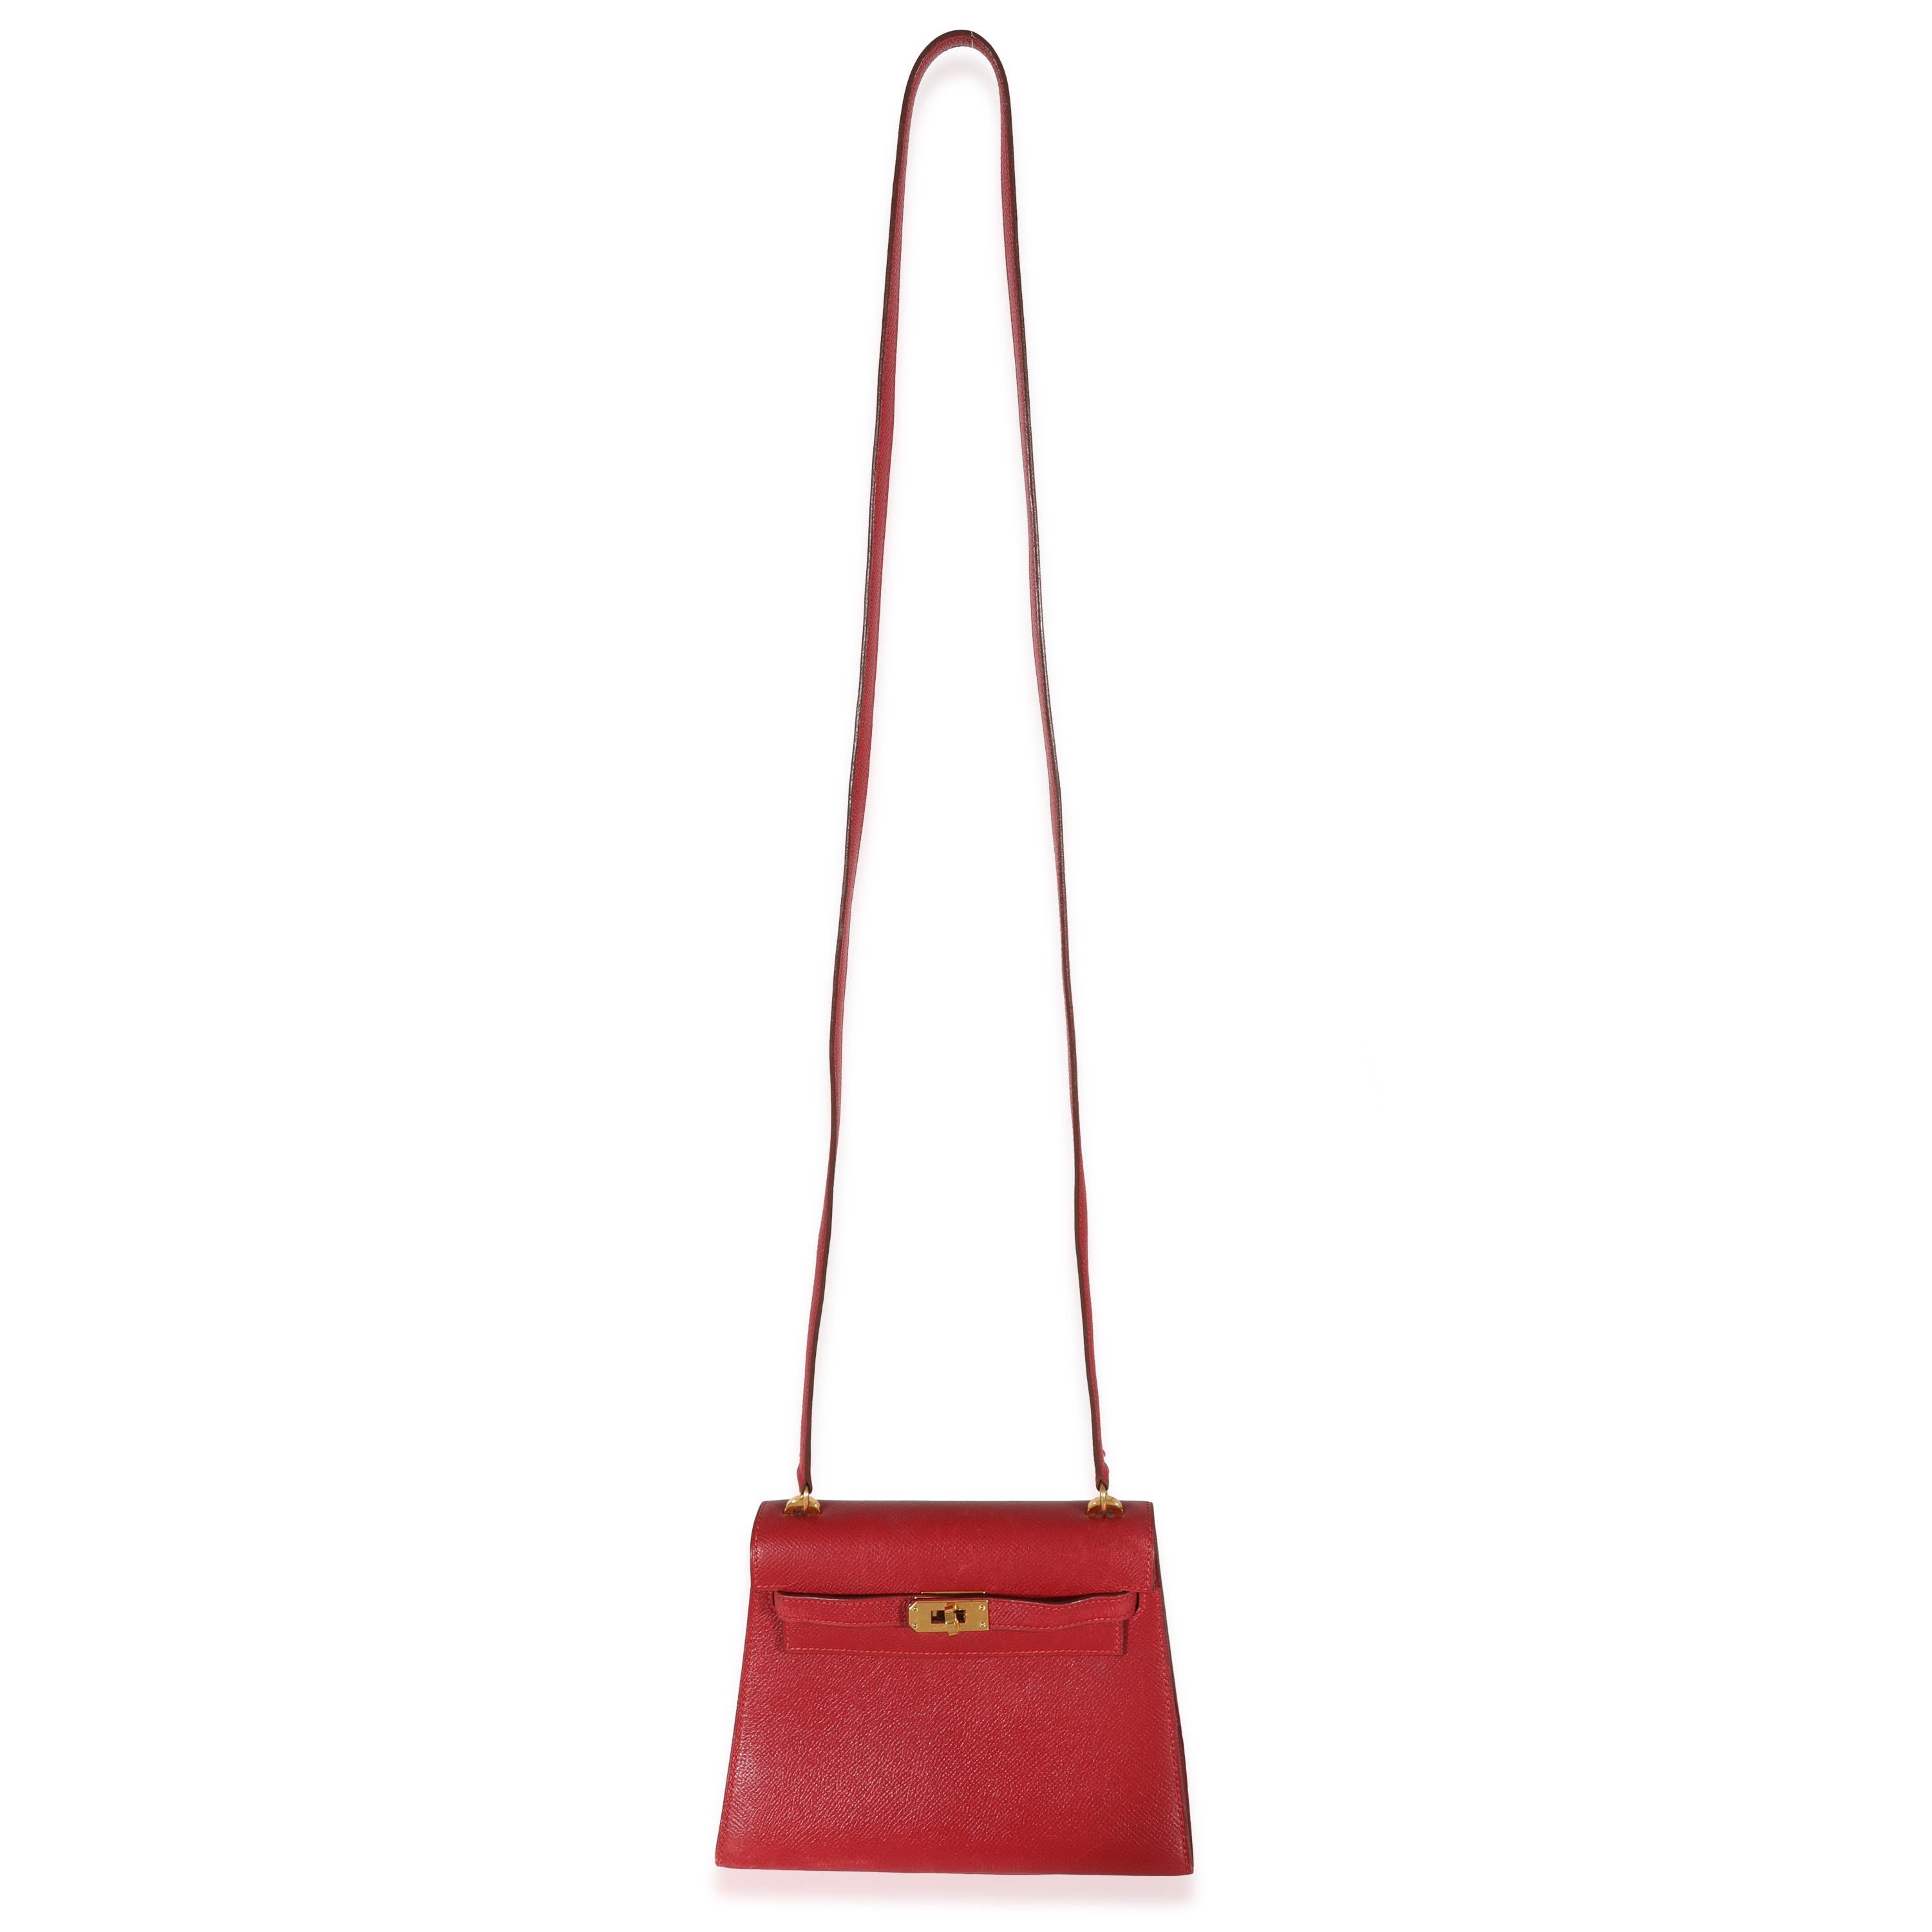 Listing Title: Hermes Vintage Rouge Vif Courchevel Mini Sellier Shoulder Kelly 20 GHW
SKU: Z130769
Condition: Pre-owned 
Condition Description: Officially renamed in 1977, the Kelly tote bag from Hermès was originally called the Sac à Dépêches